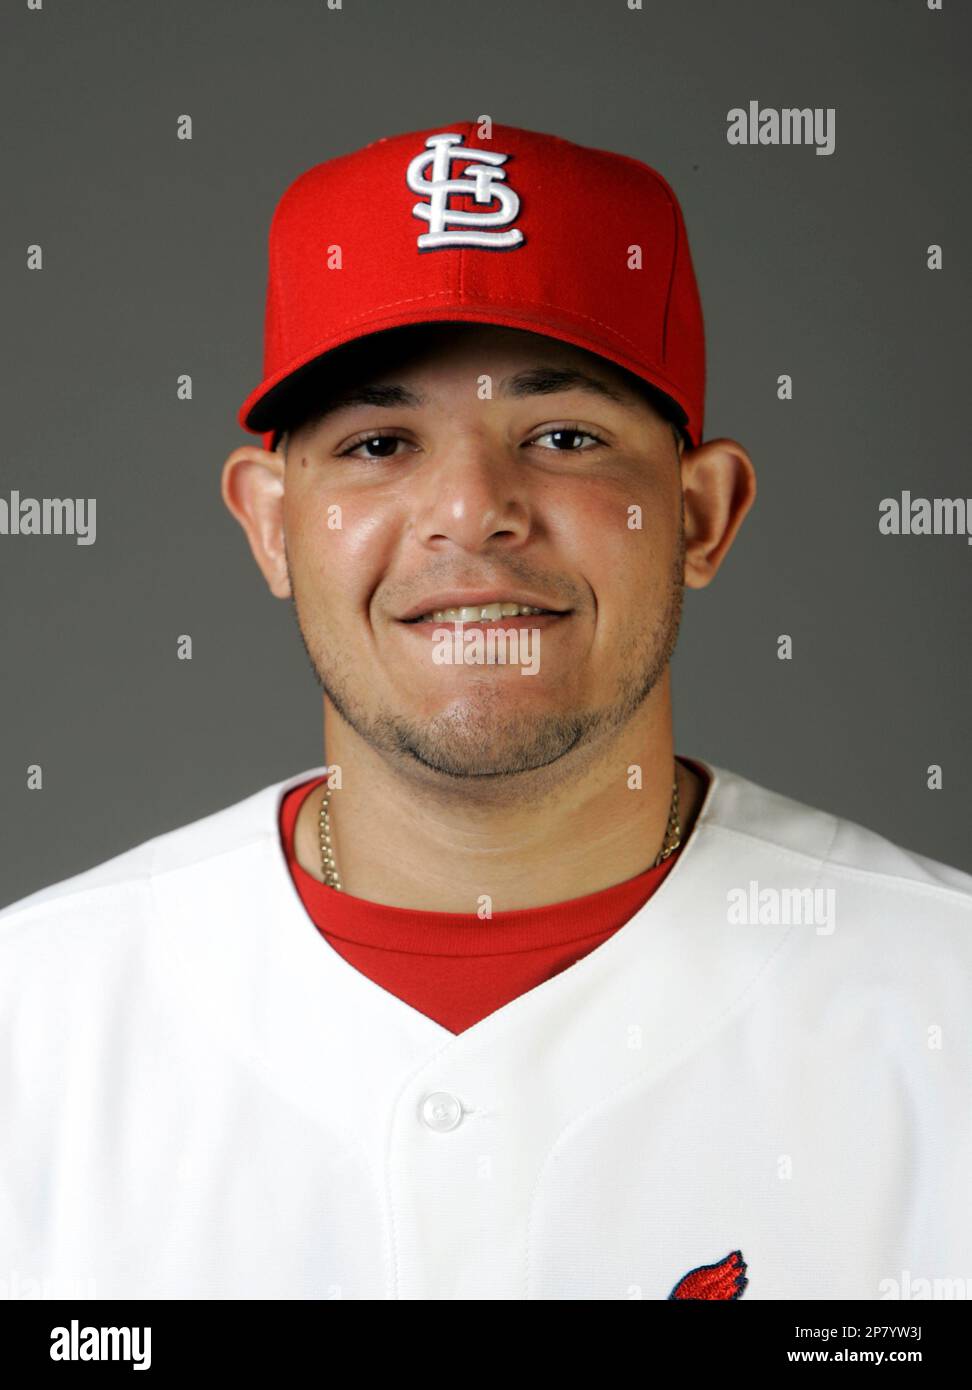 FILE -- This is a 2009 file photo showing St. Louis Cardinals baseball  player Yadier Molina. A New York sports marketing firm has sued St. Louis  Cardinals catcher Yadier Molina, saying he